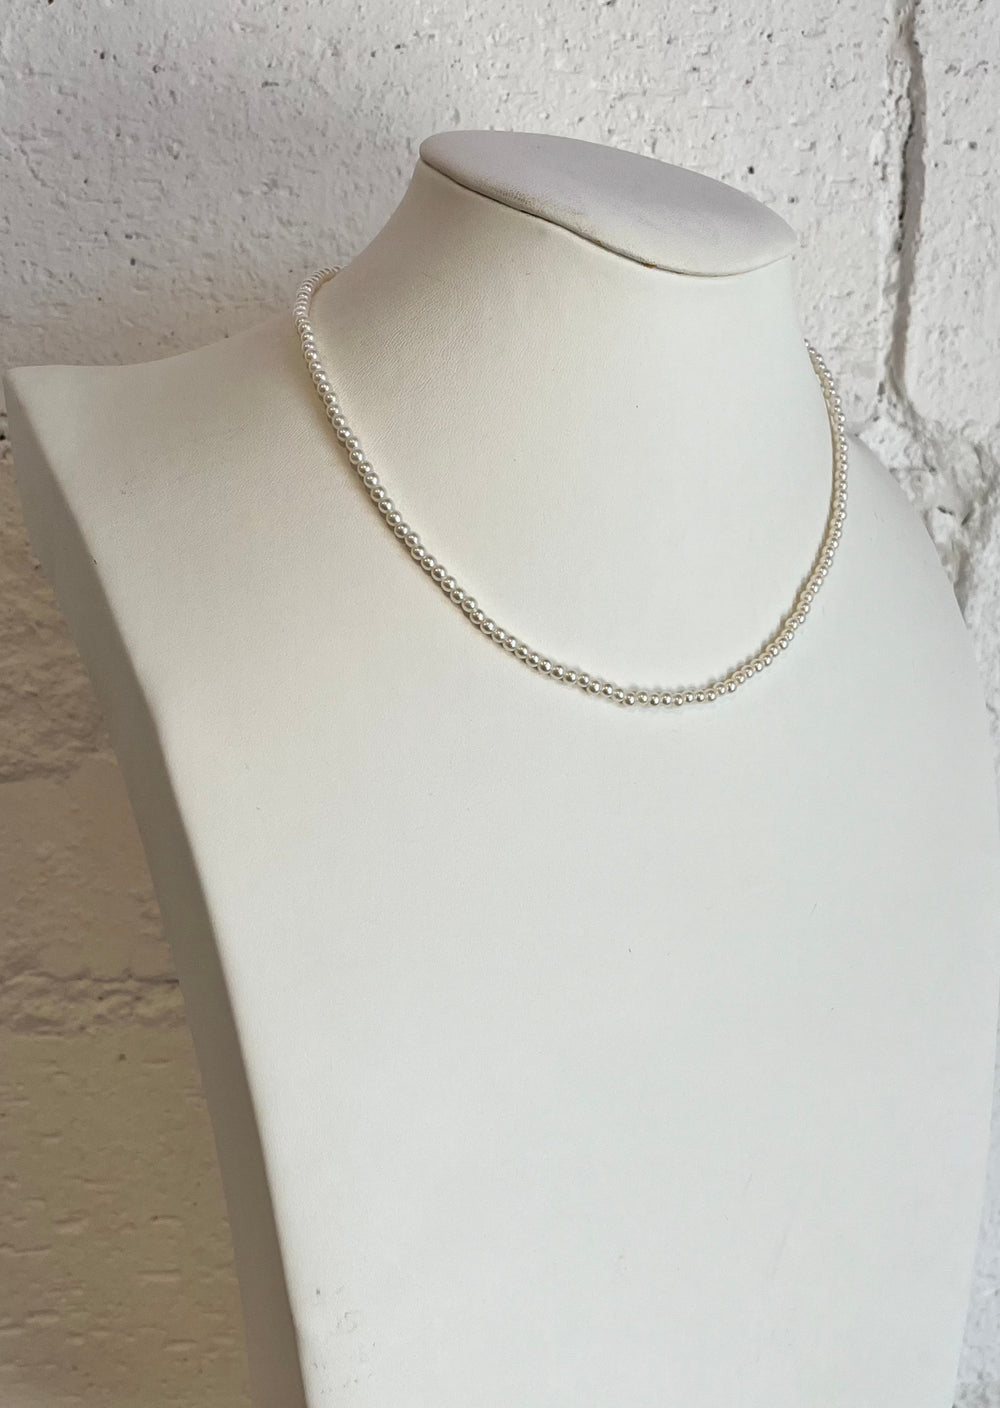 Gold Dipped 3MM Pearl Necklace, Jewelry, Adeline, Adeline, dallas boutique, dallas texas, texas boutique, women's boutique dallas, adeline boutique, dallas boutique, trendy boutique, affordable boutique